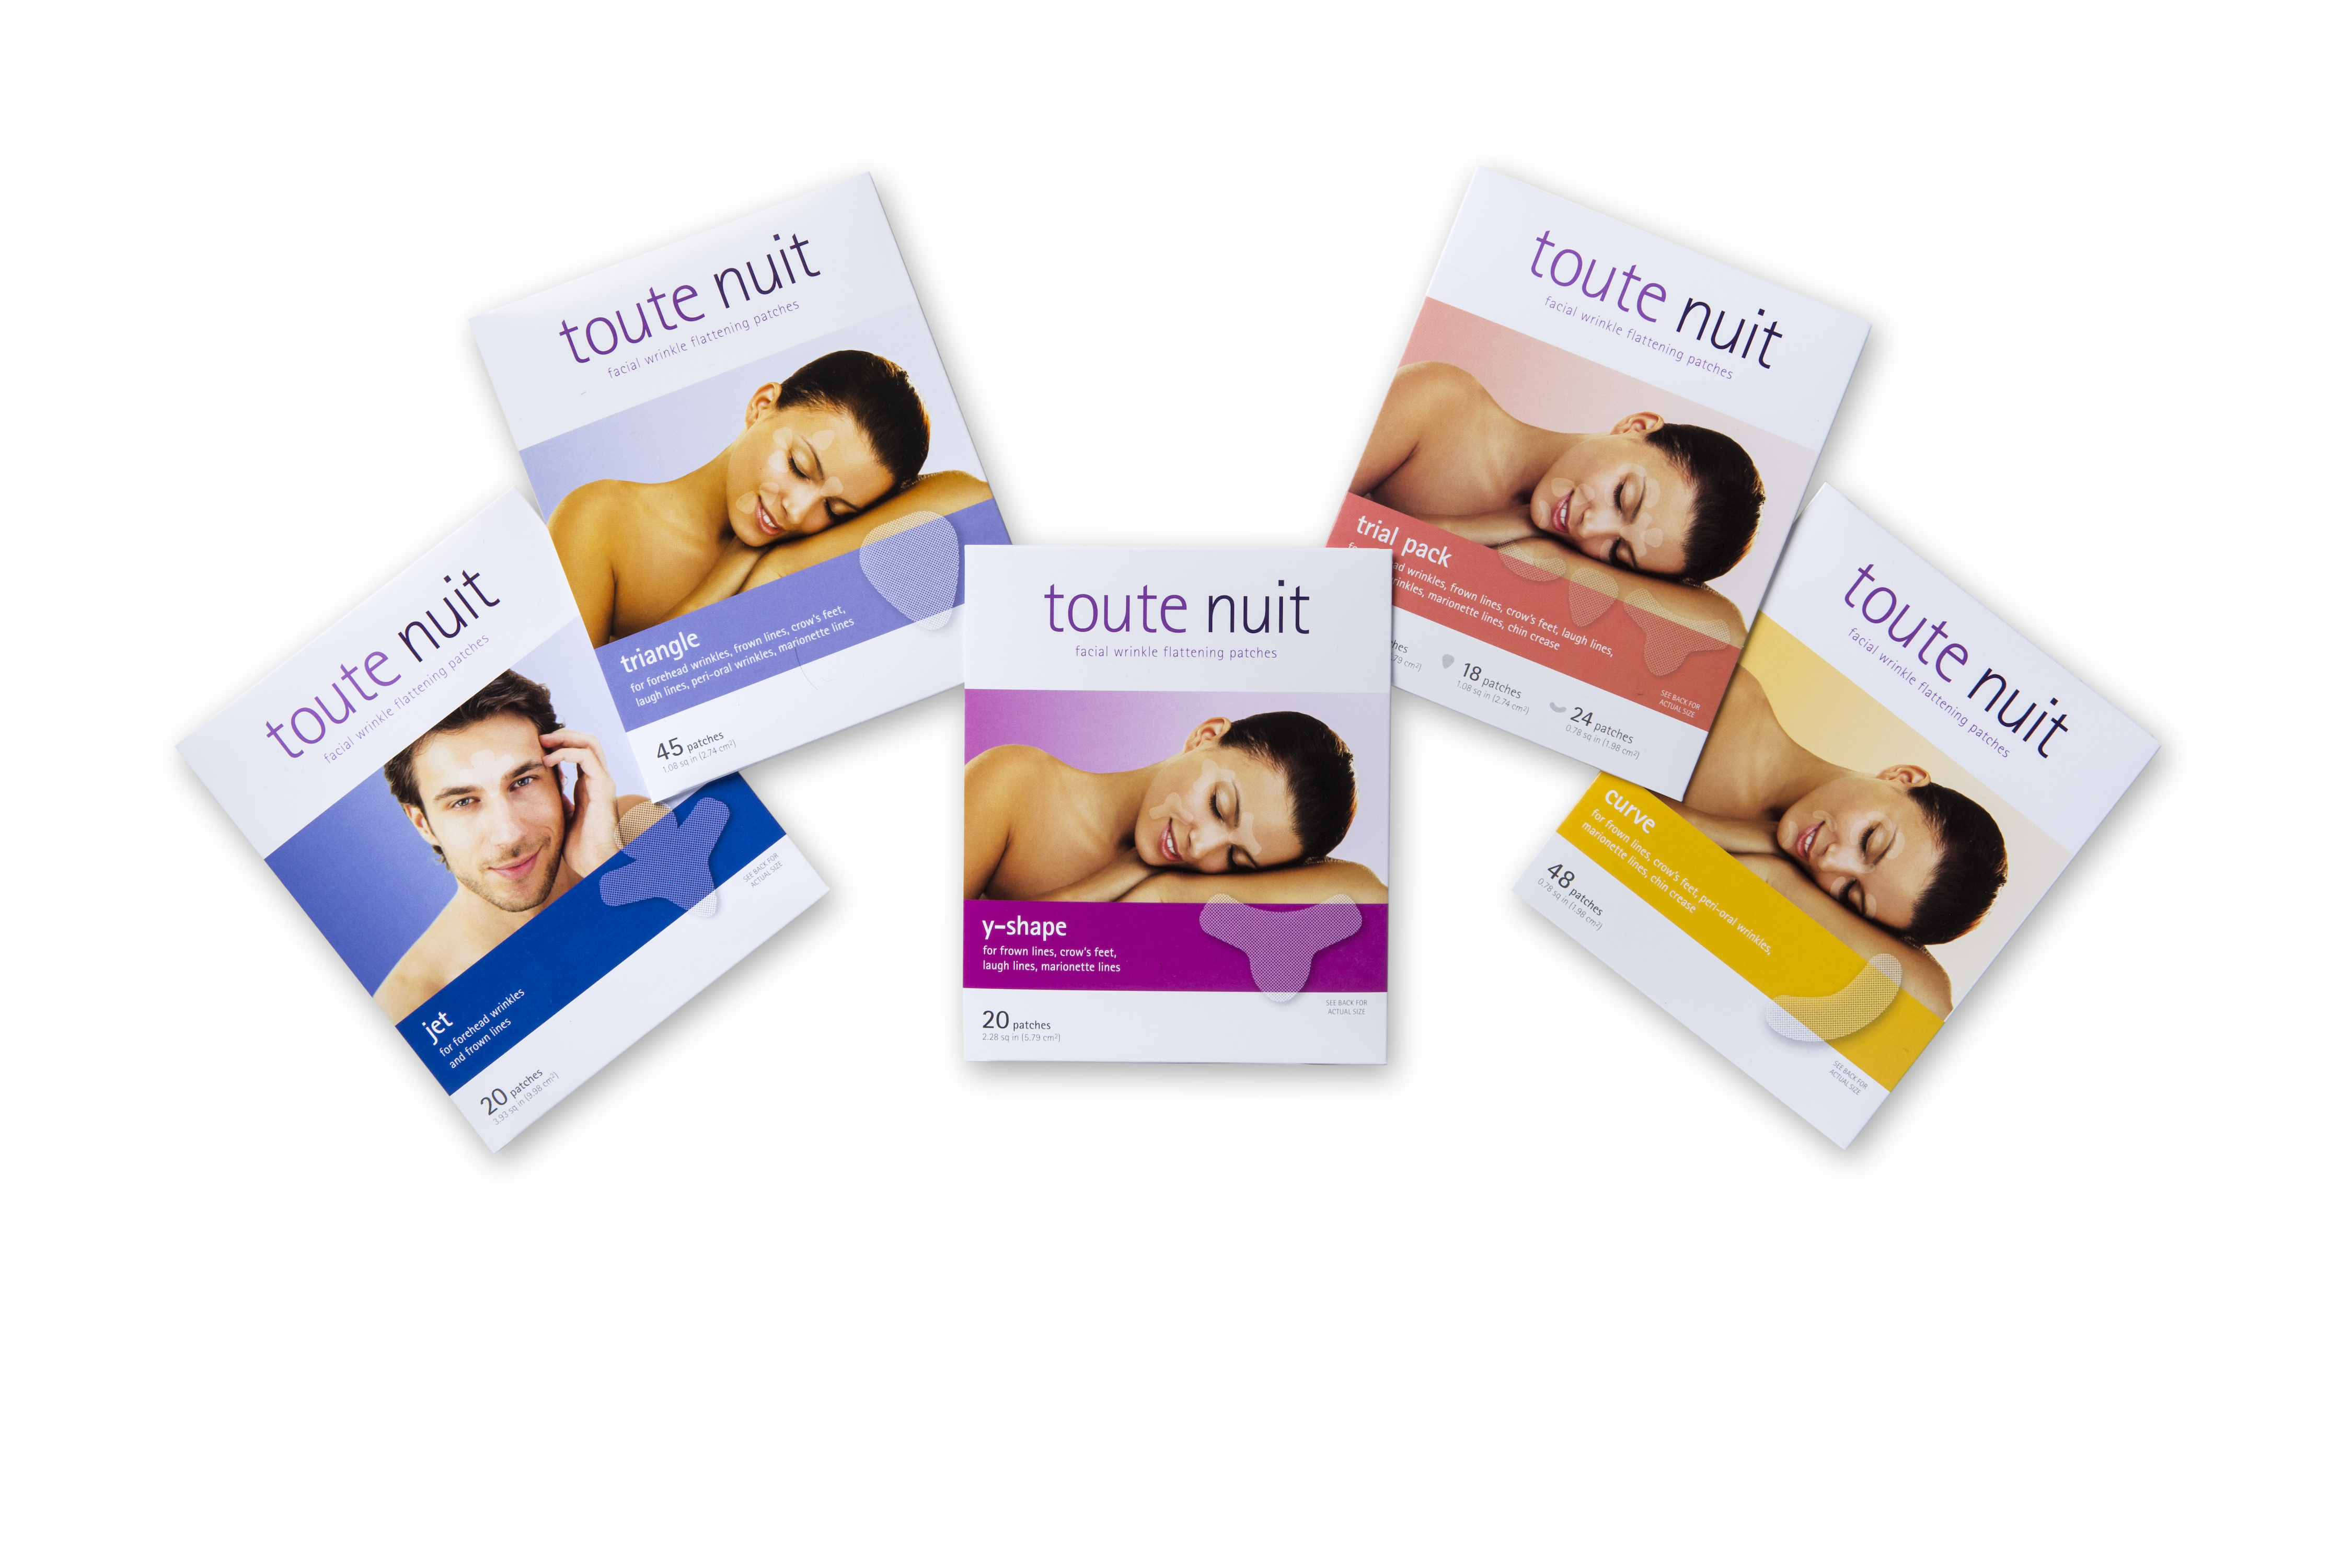 Toute Nuit Facial Wrinkle Patches - A New Skin Care Wrinkle Defense System